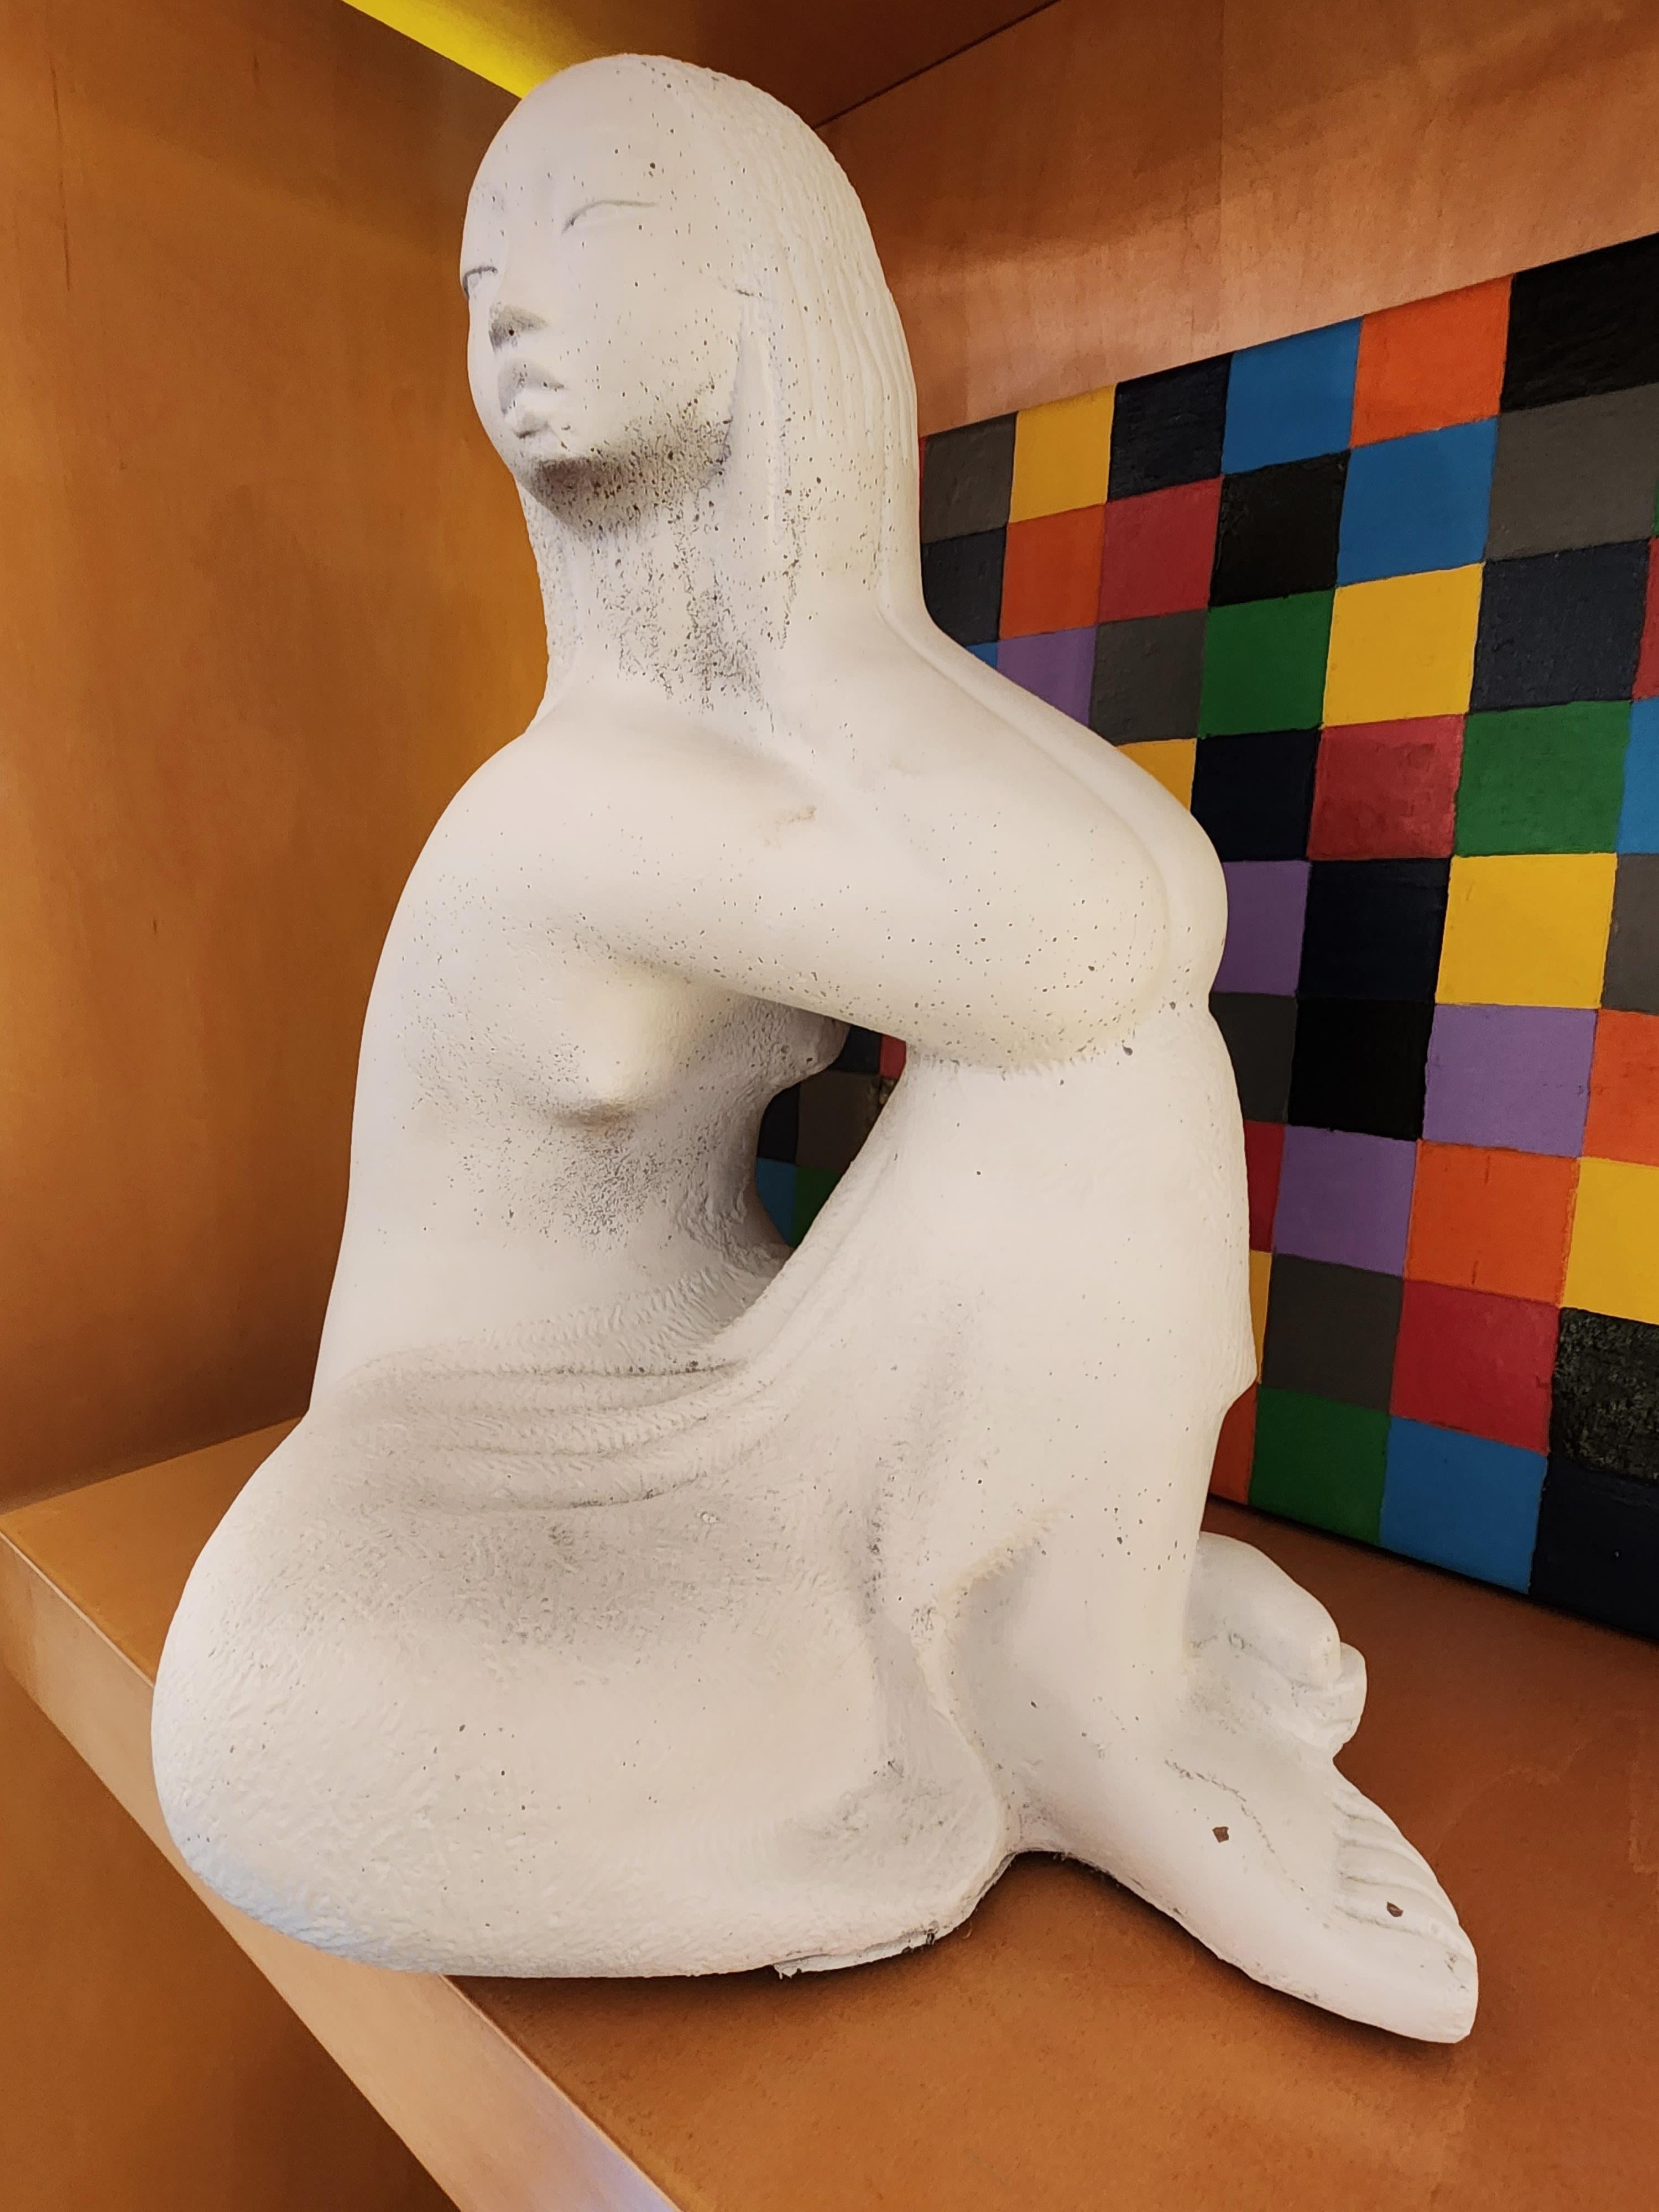 Chuck Dodson Florida Artist Seated Nude Sculpture circa 1975

Offered for sale is a  circa 1975 seated nude figurative composition sculpture by the renowned Florida artist Chuck Dodson (1908 – 1993).  The artist was a sculptor who was a resident